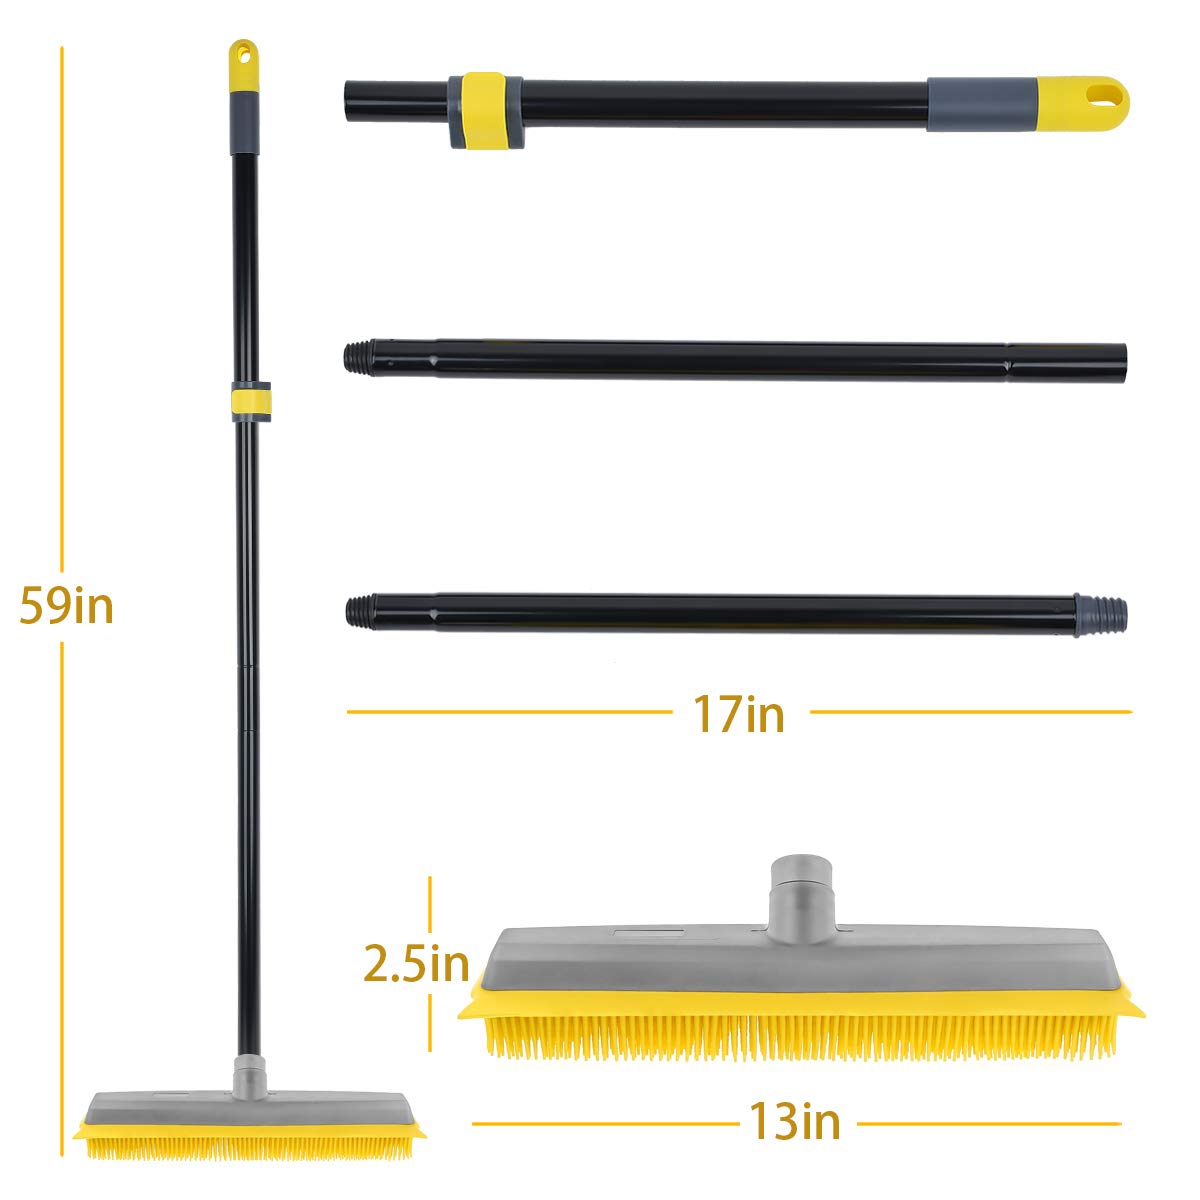 Rubber Broom Carpet Rake for Pet Hair Removal, Fur Remover Broom with 59 Telescoping Long Handle, Pet Hair Broom with Squeegee for Carpet, Hardwood